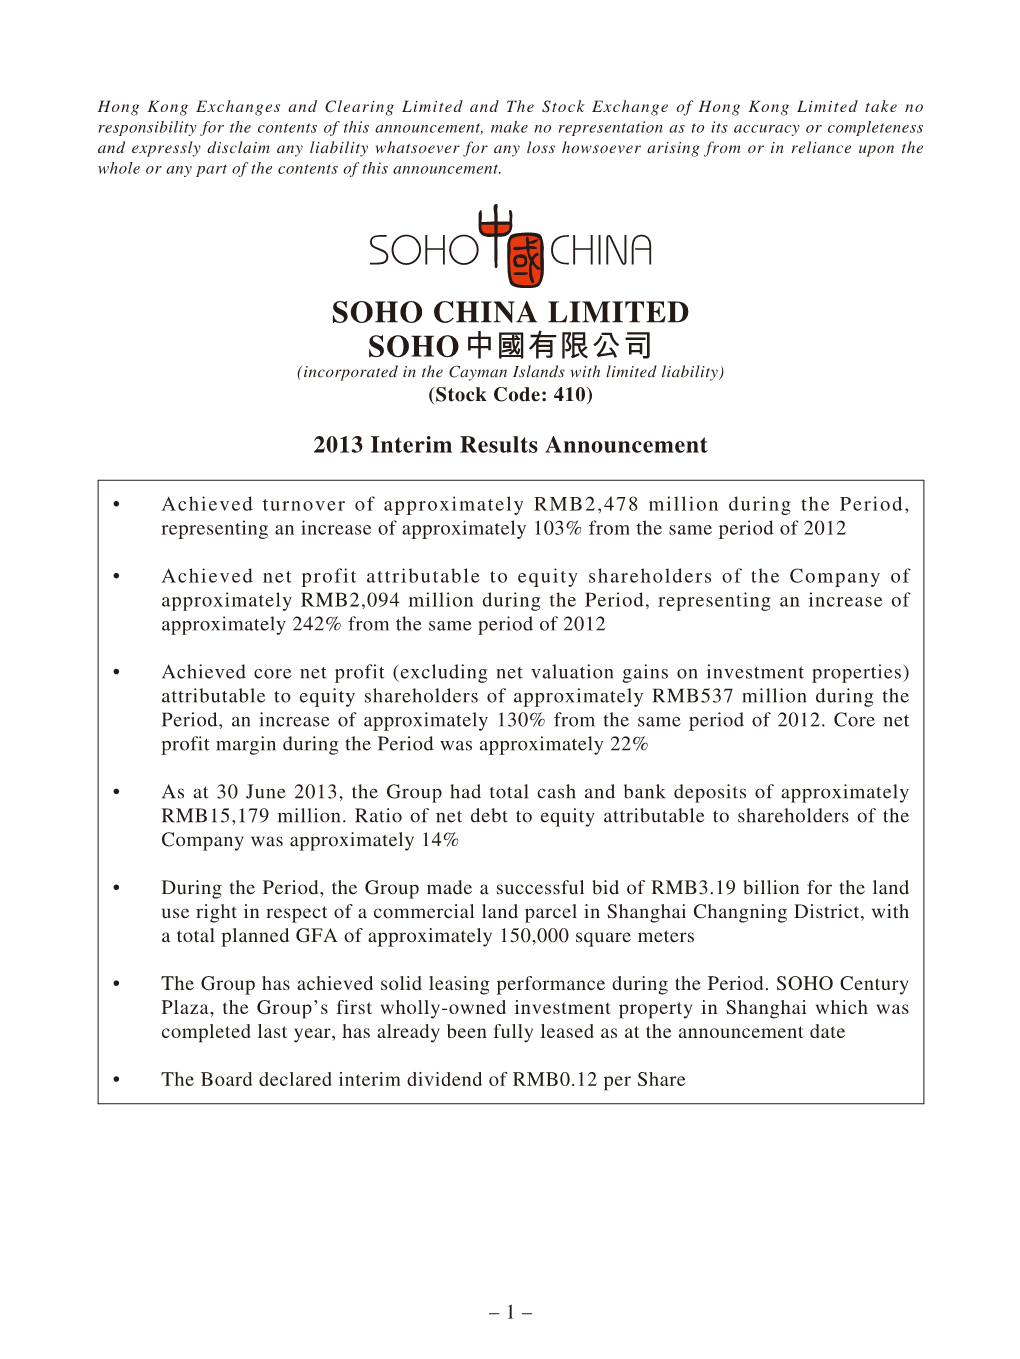 SOHO CHINA LIMITED SOHO中國有限公司 (Incorporated in the Cayman Islands with Limited Liability) (Stock Code: 410)